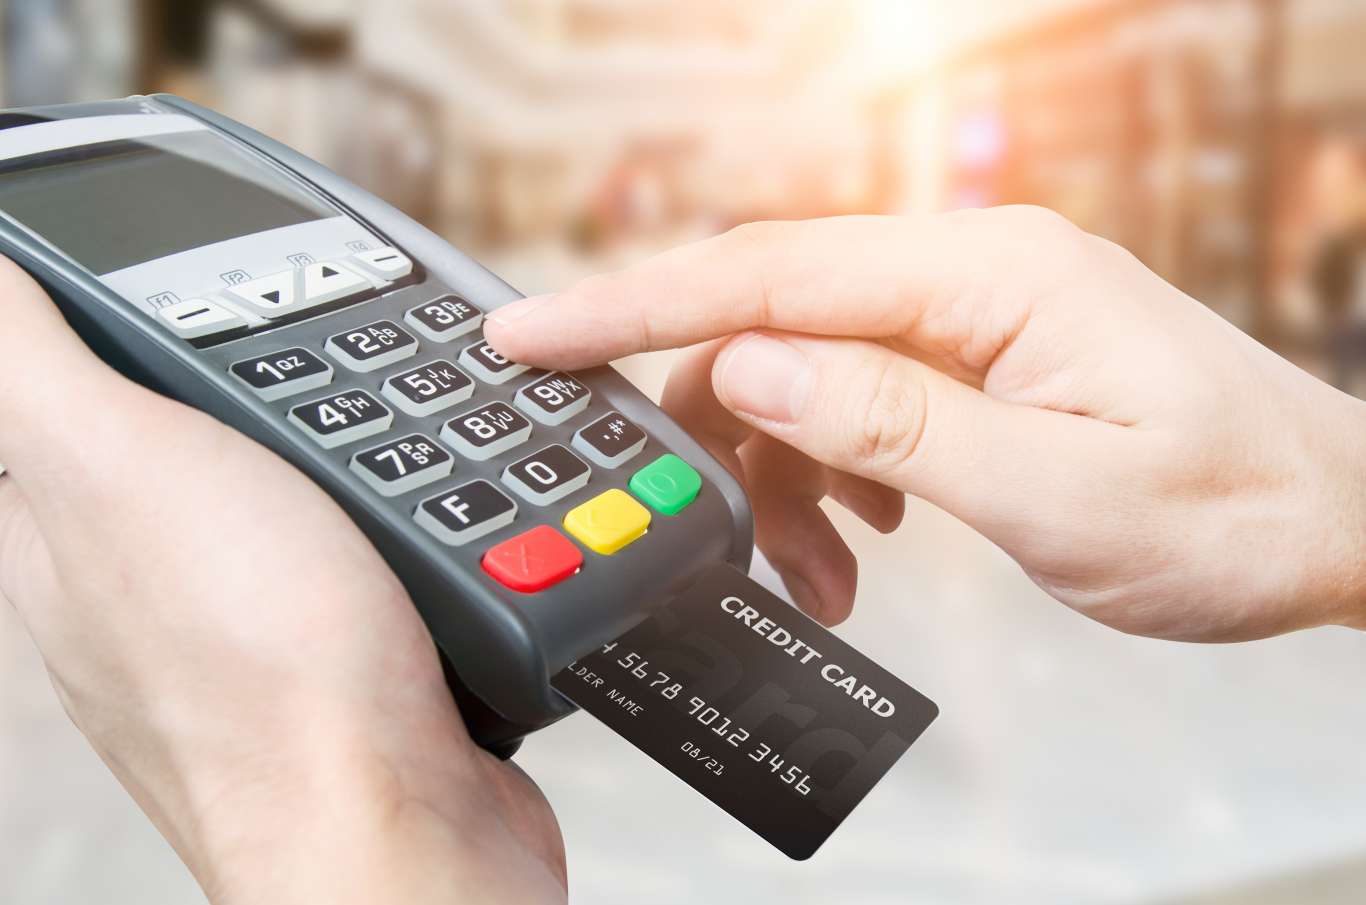 Hand with credit card swipe through terminal for sale in supermarket